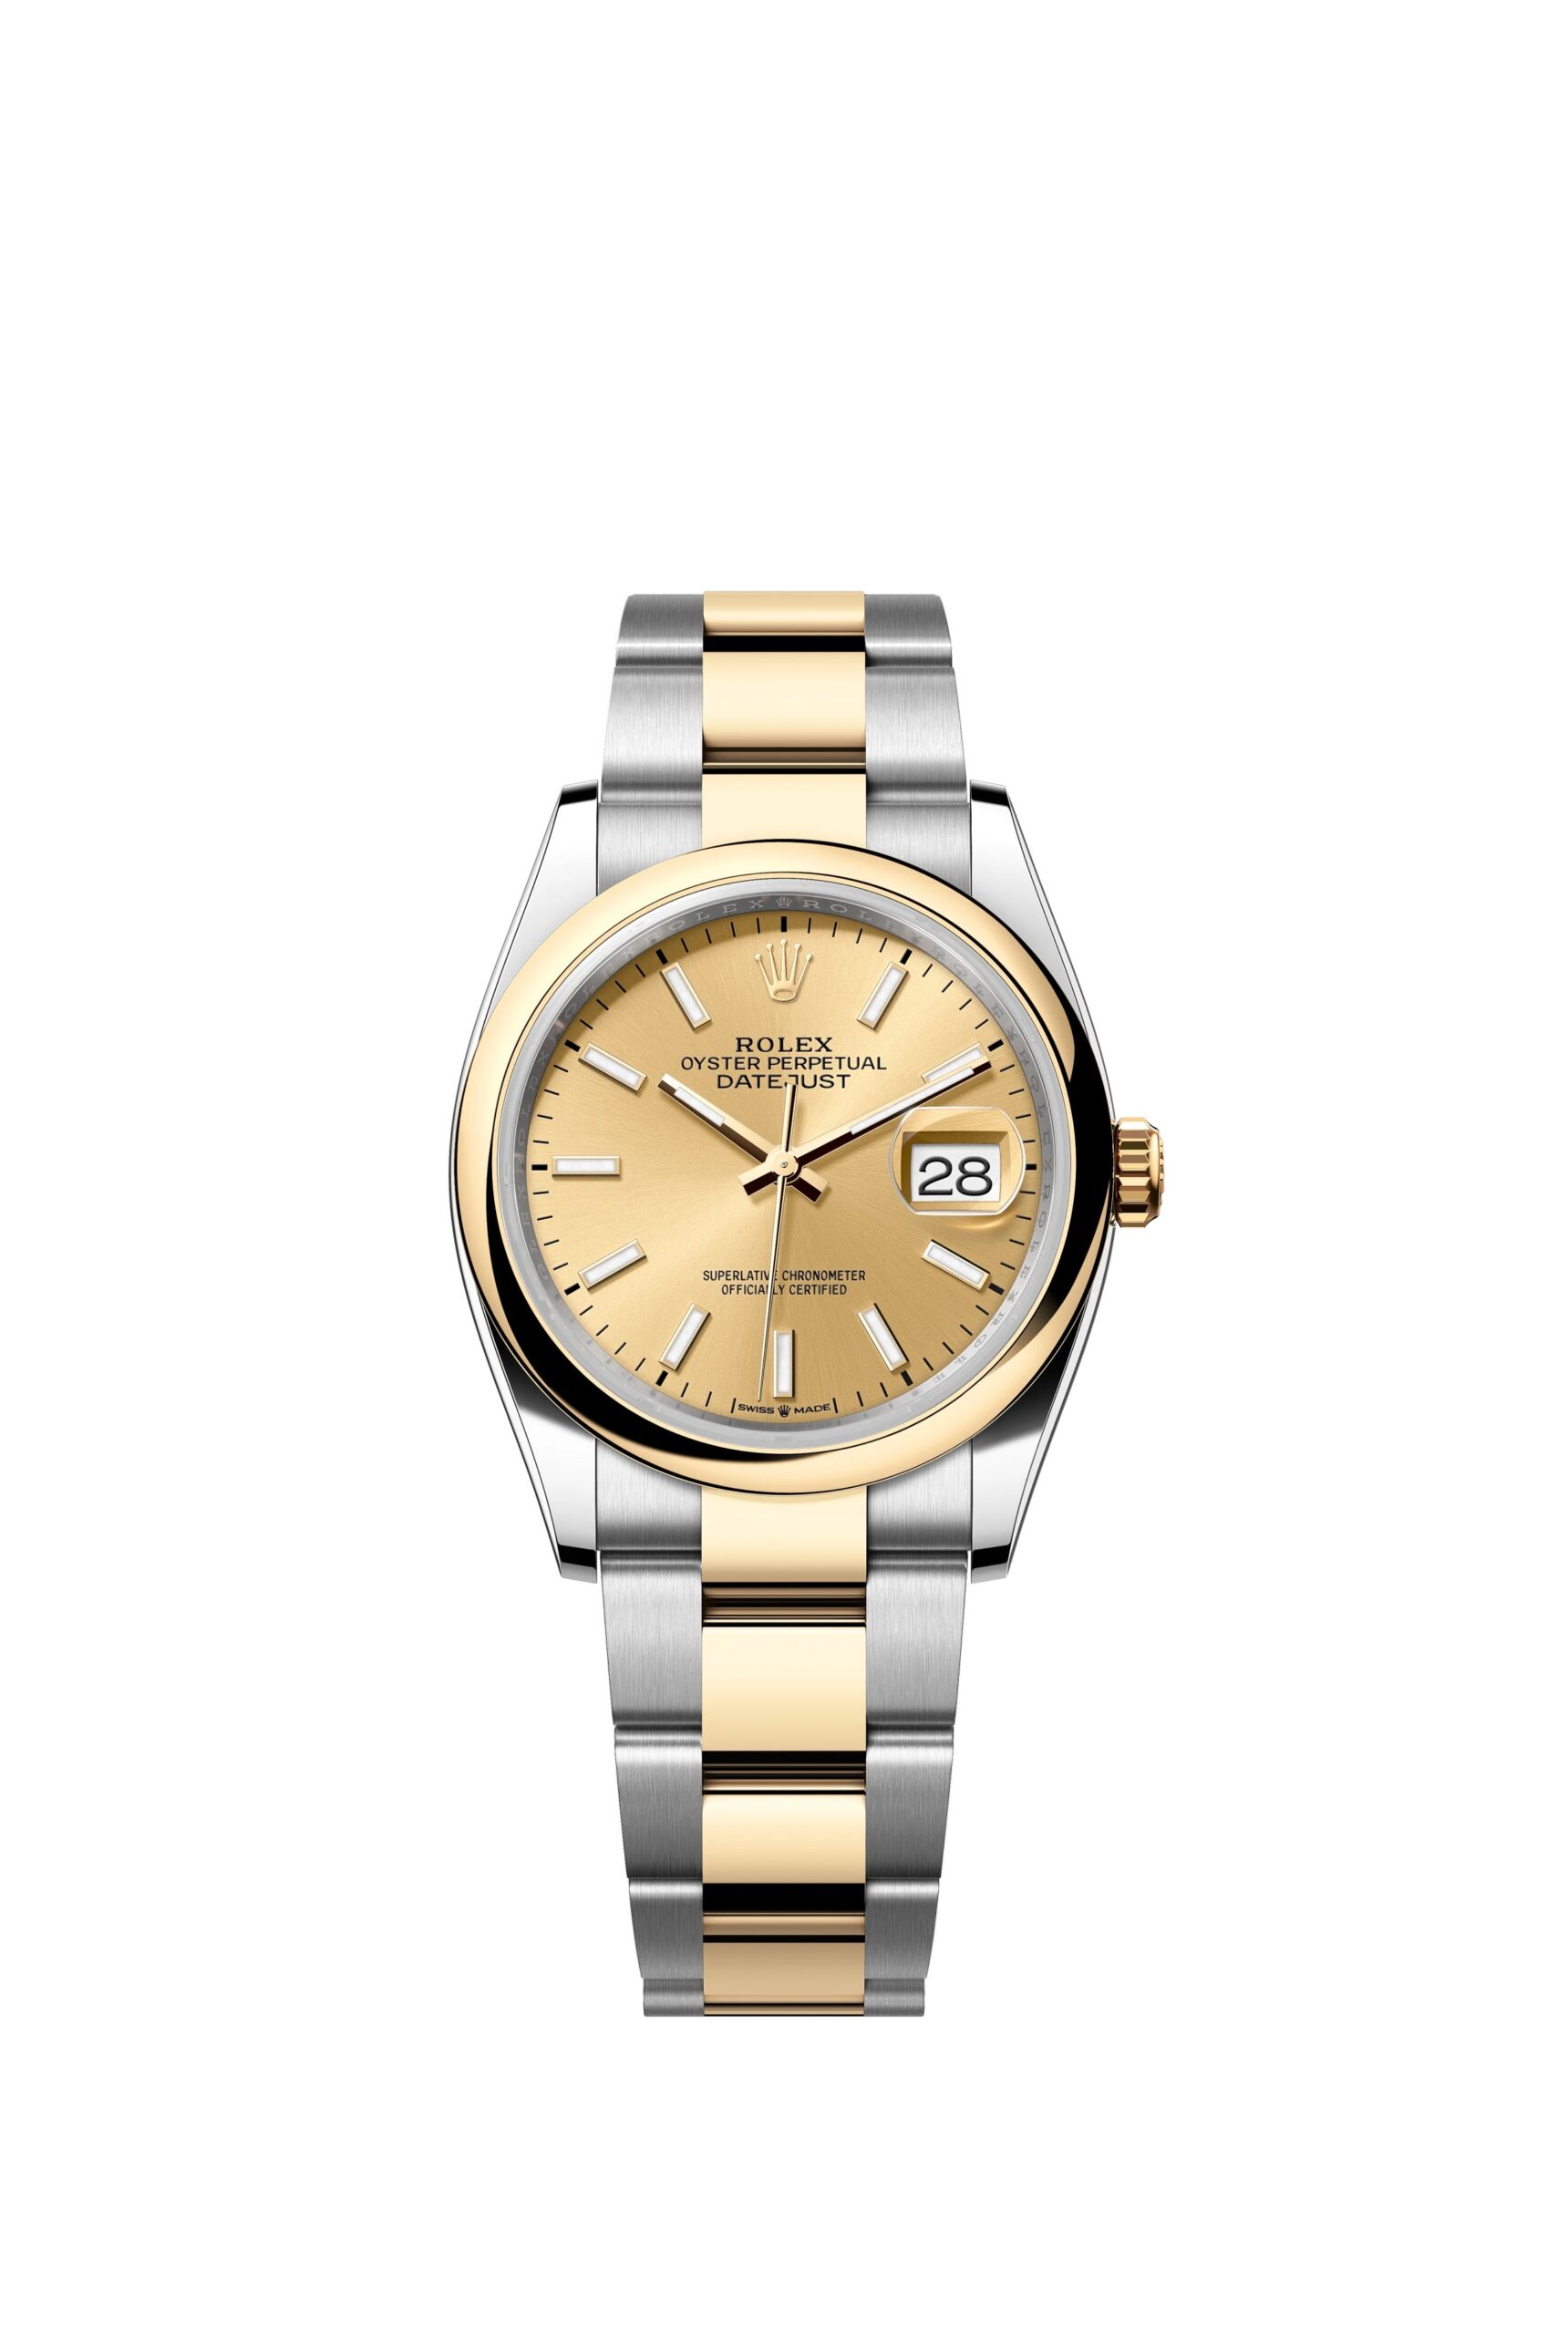 Rolex Datejust 36 Oyster, 36 mm, Oystersteel and yellow gold Reference 126203